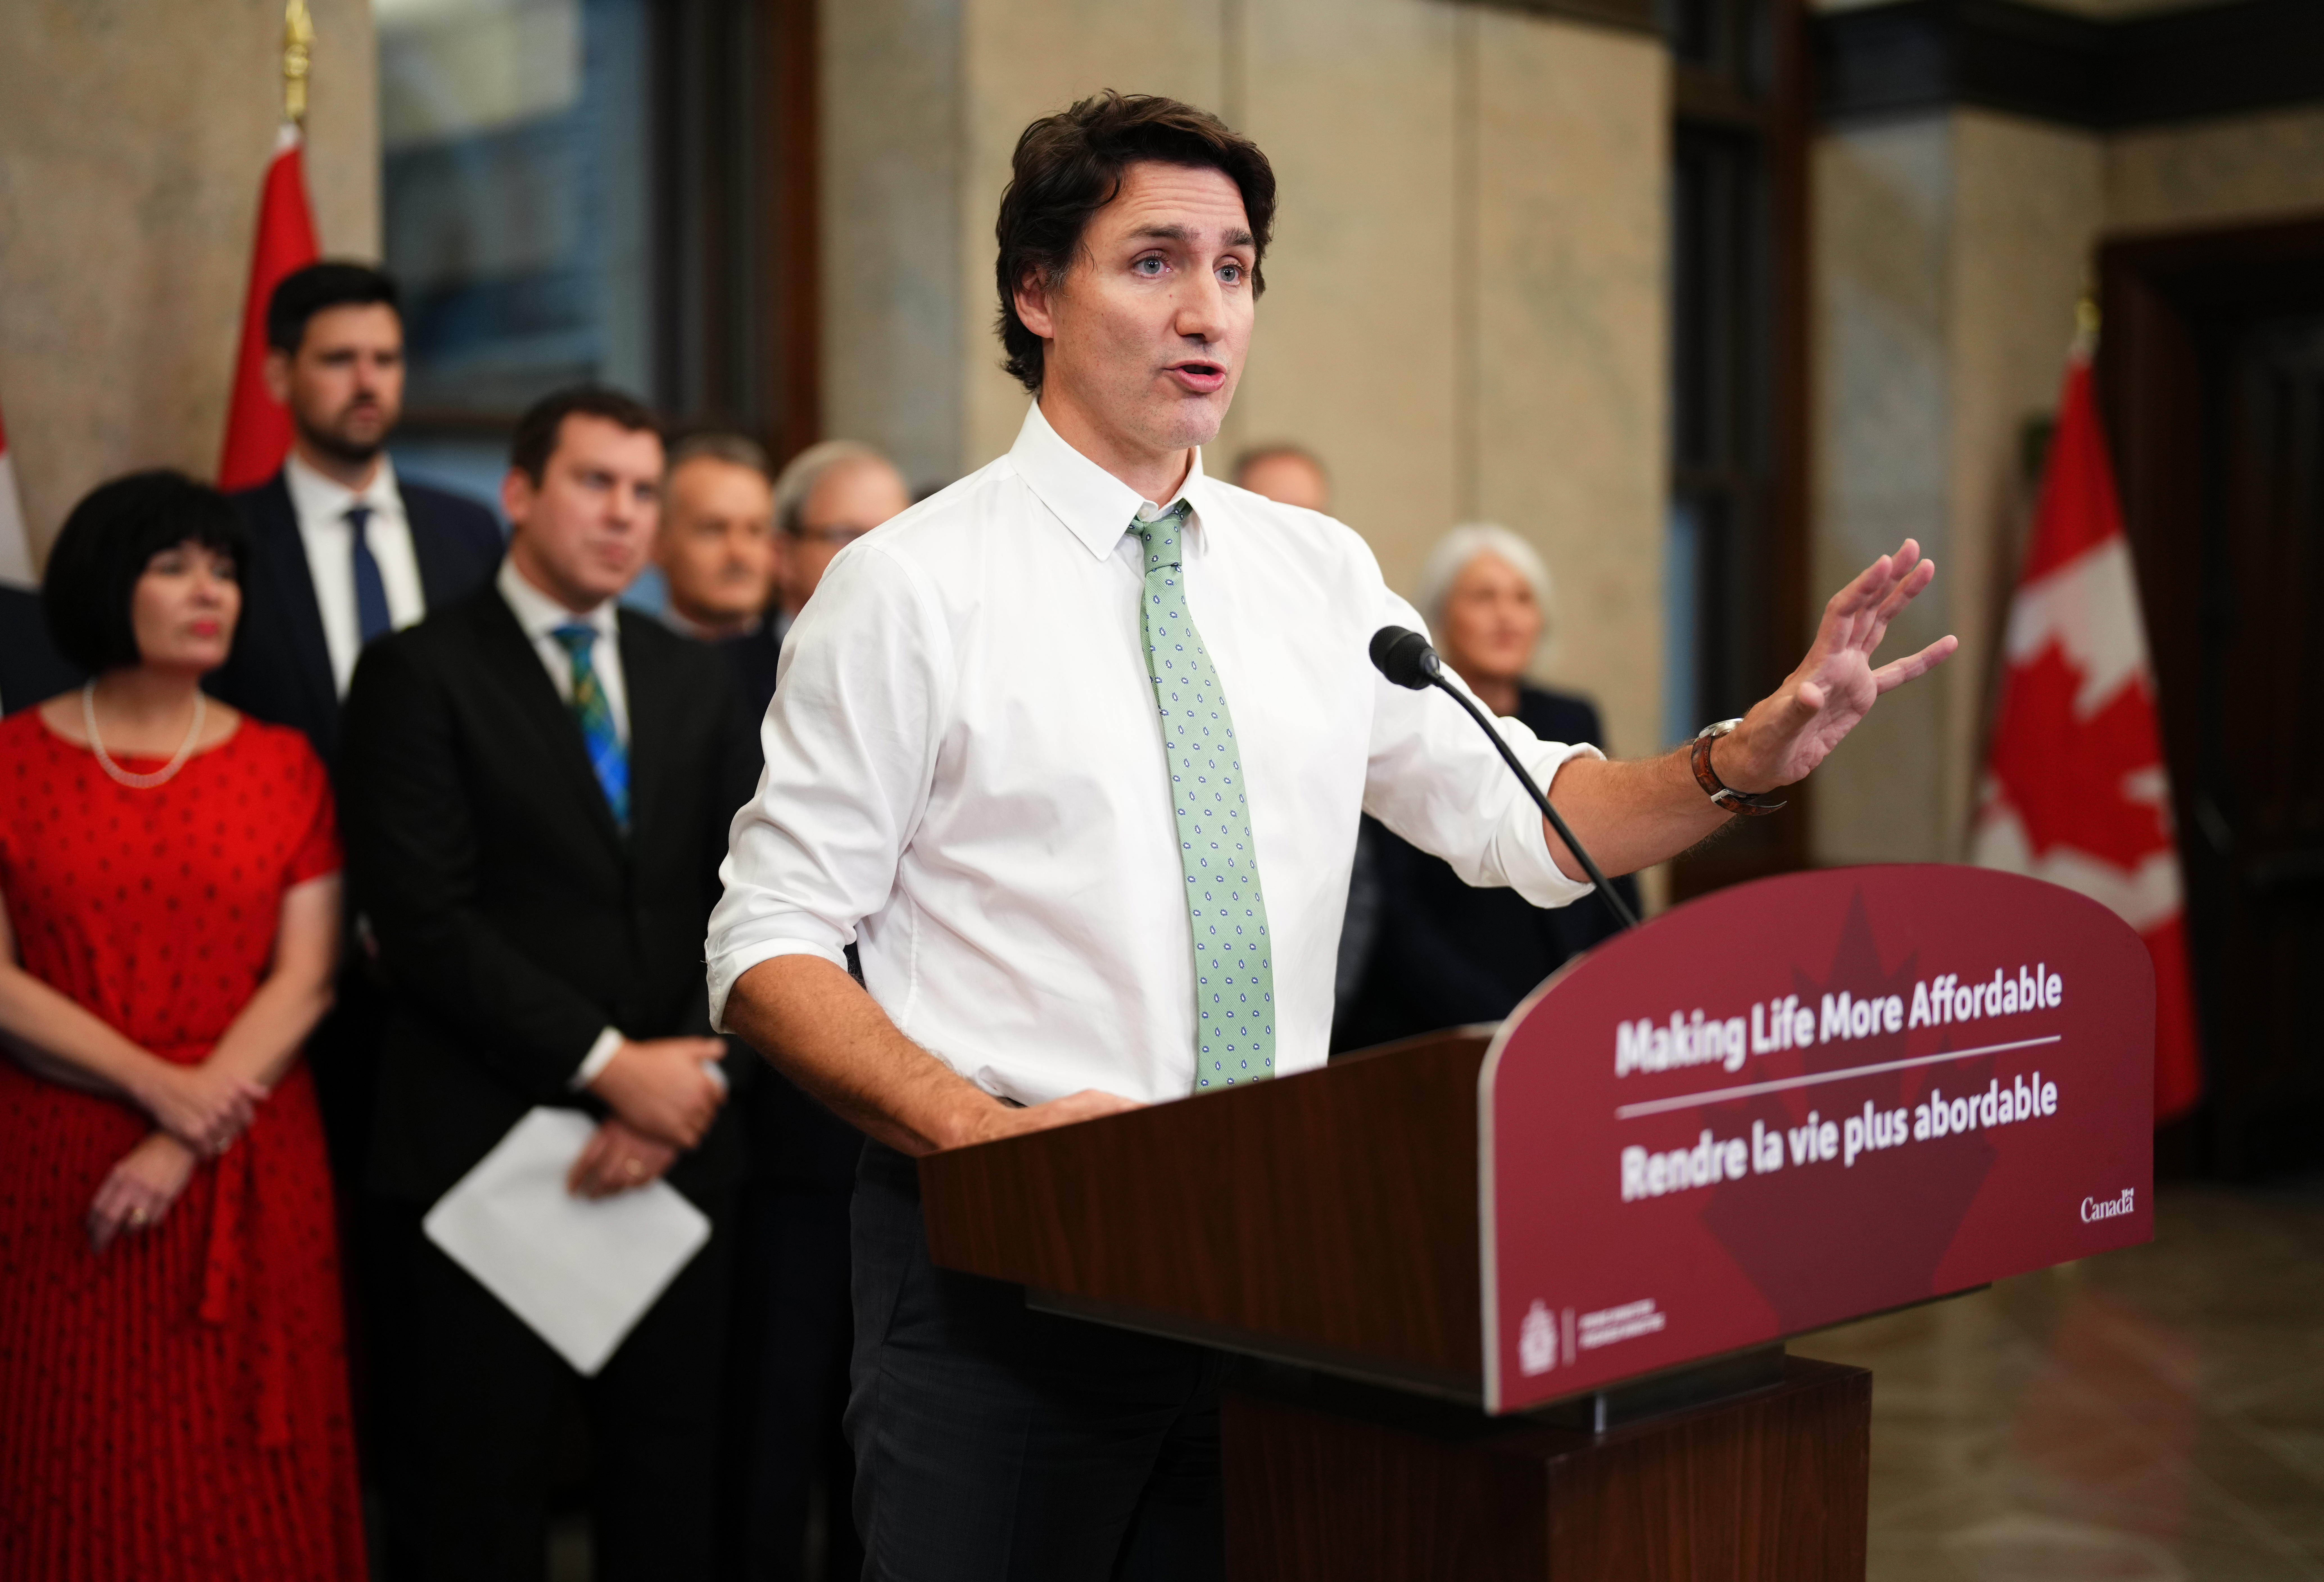 Ottawa to pause carbon pricing on home heating oil for 3 years, Trudeau says